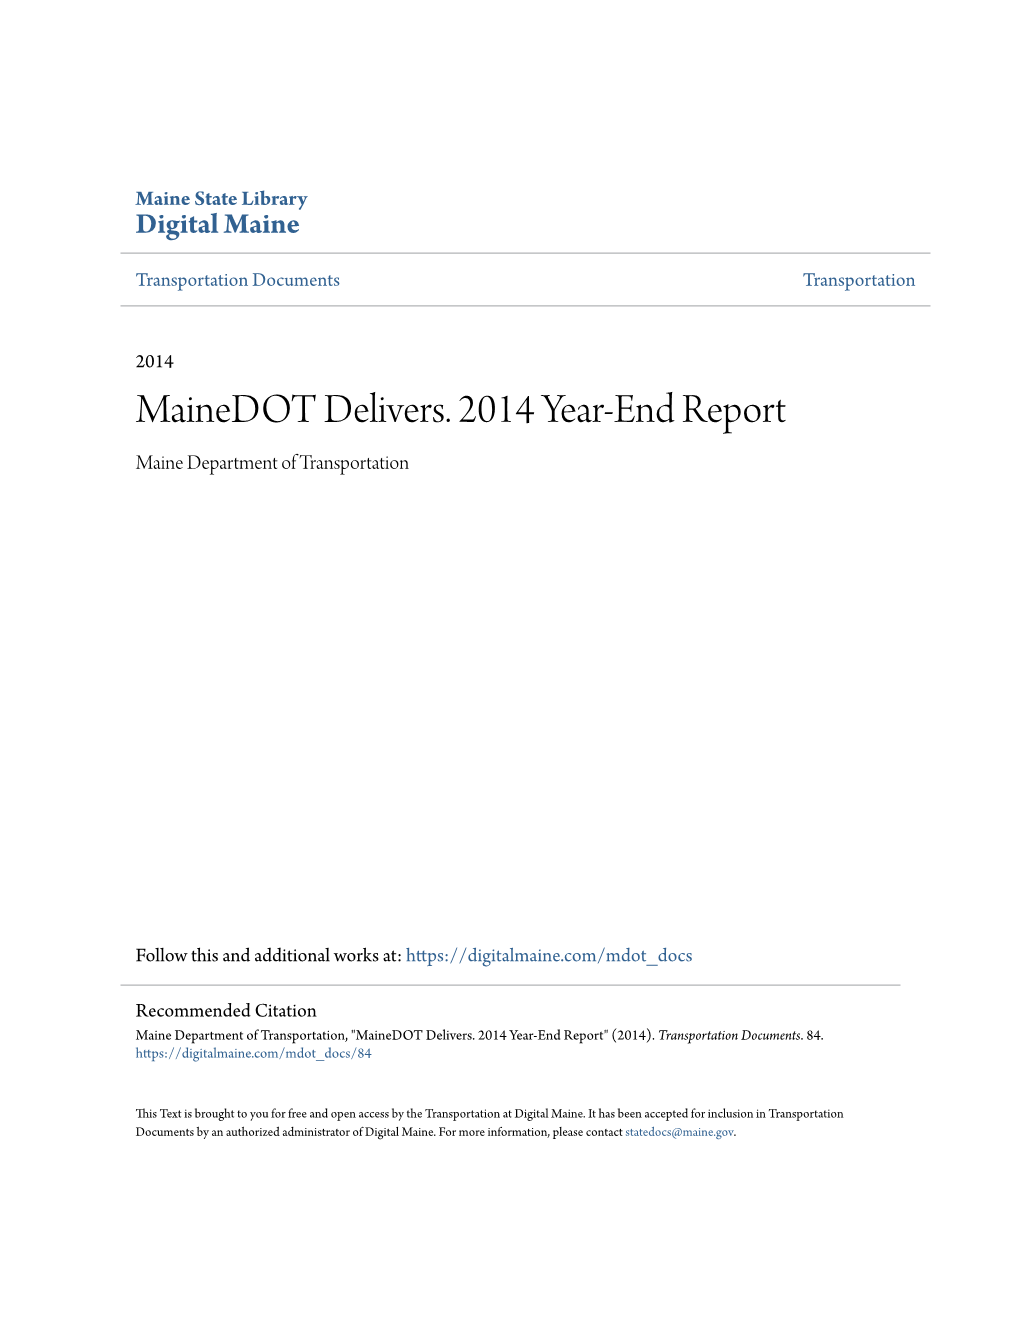 Mainedot Delivers. 2014 Year-End Report Maine Department of Transportation